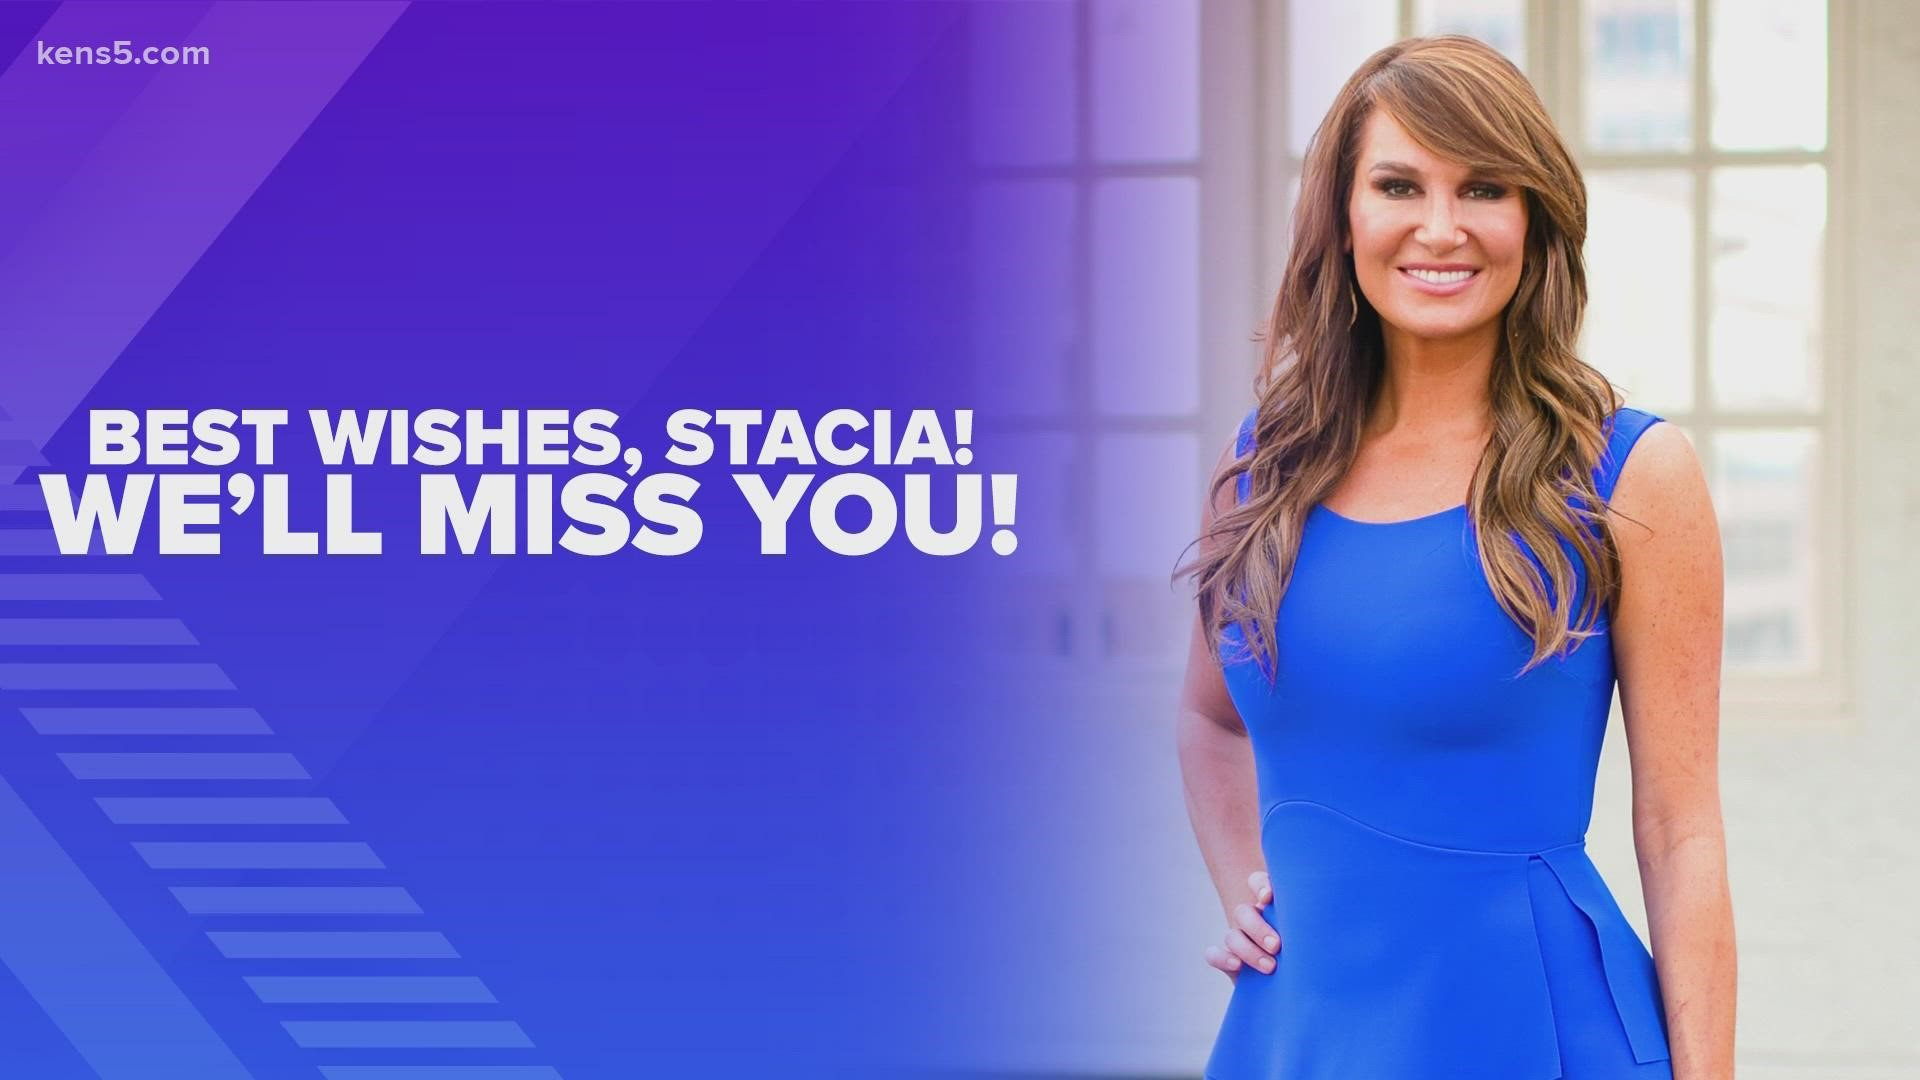 The morning traffic anchor has done it all over 14 years – weather, traffic and news. We wish her the best as she moves back home to Dallas.